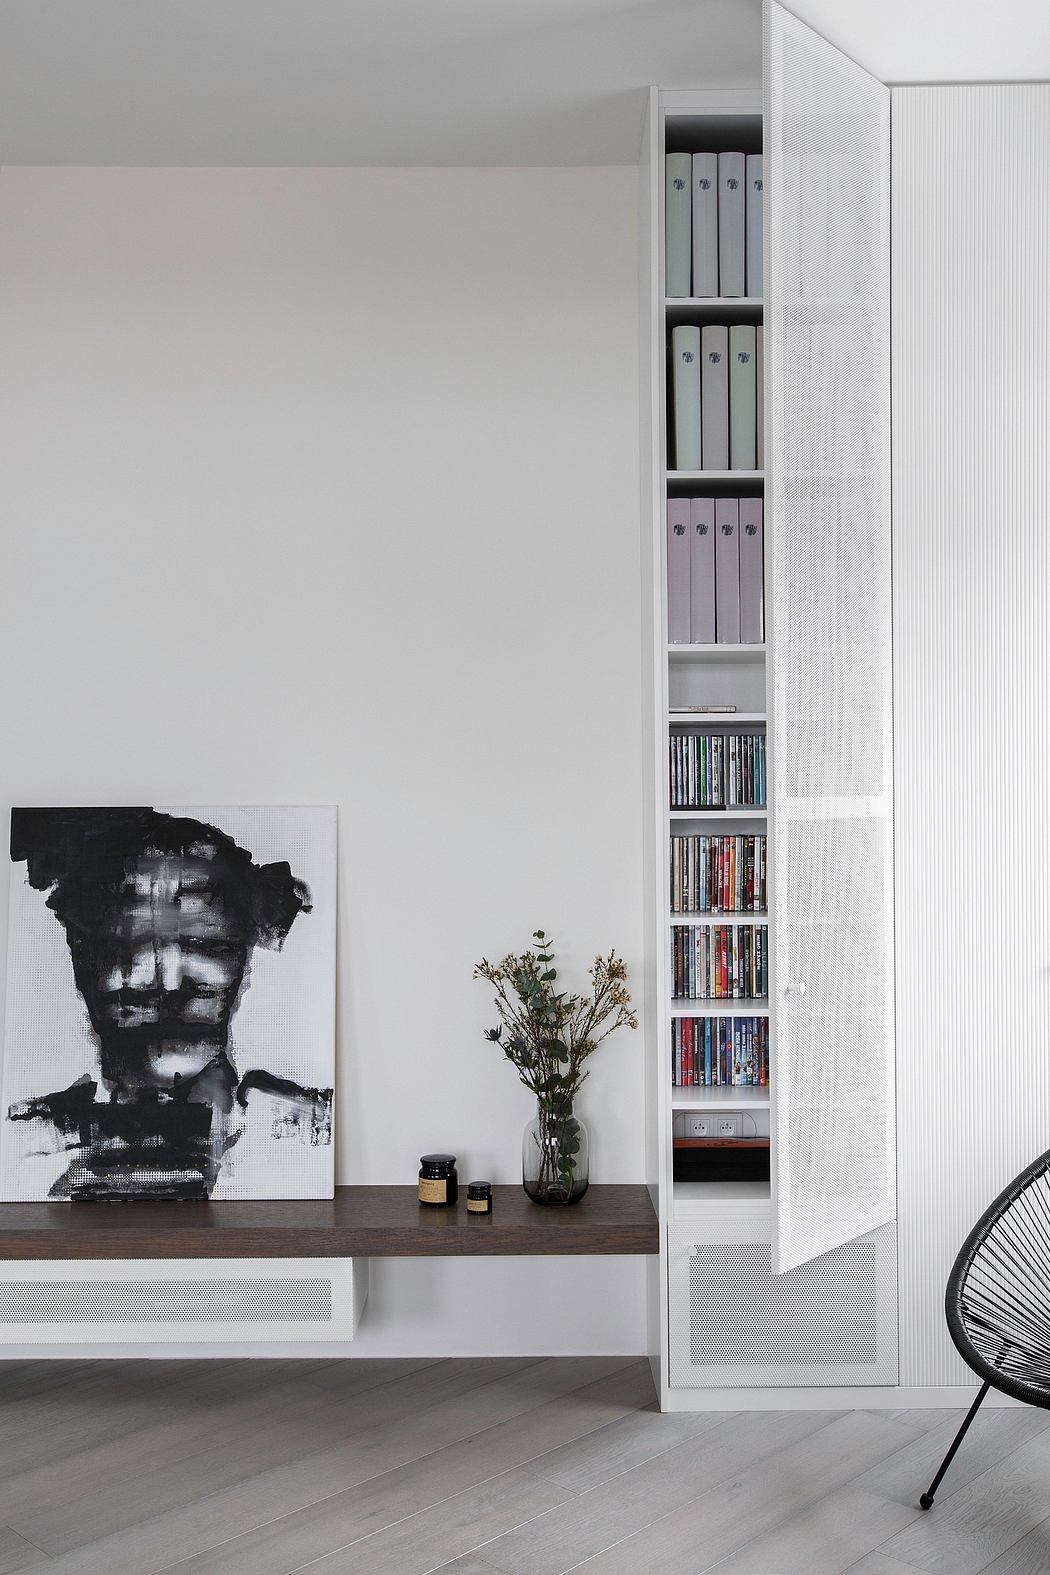 A minimalist living room with a large abstract painting, built-in shelving, and a potted plant.